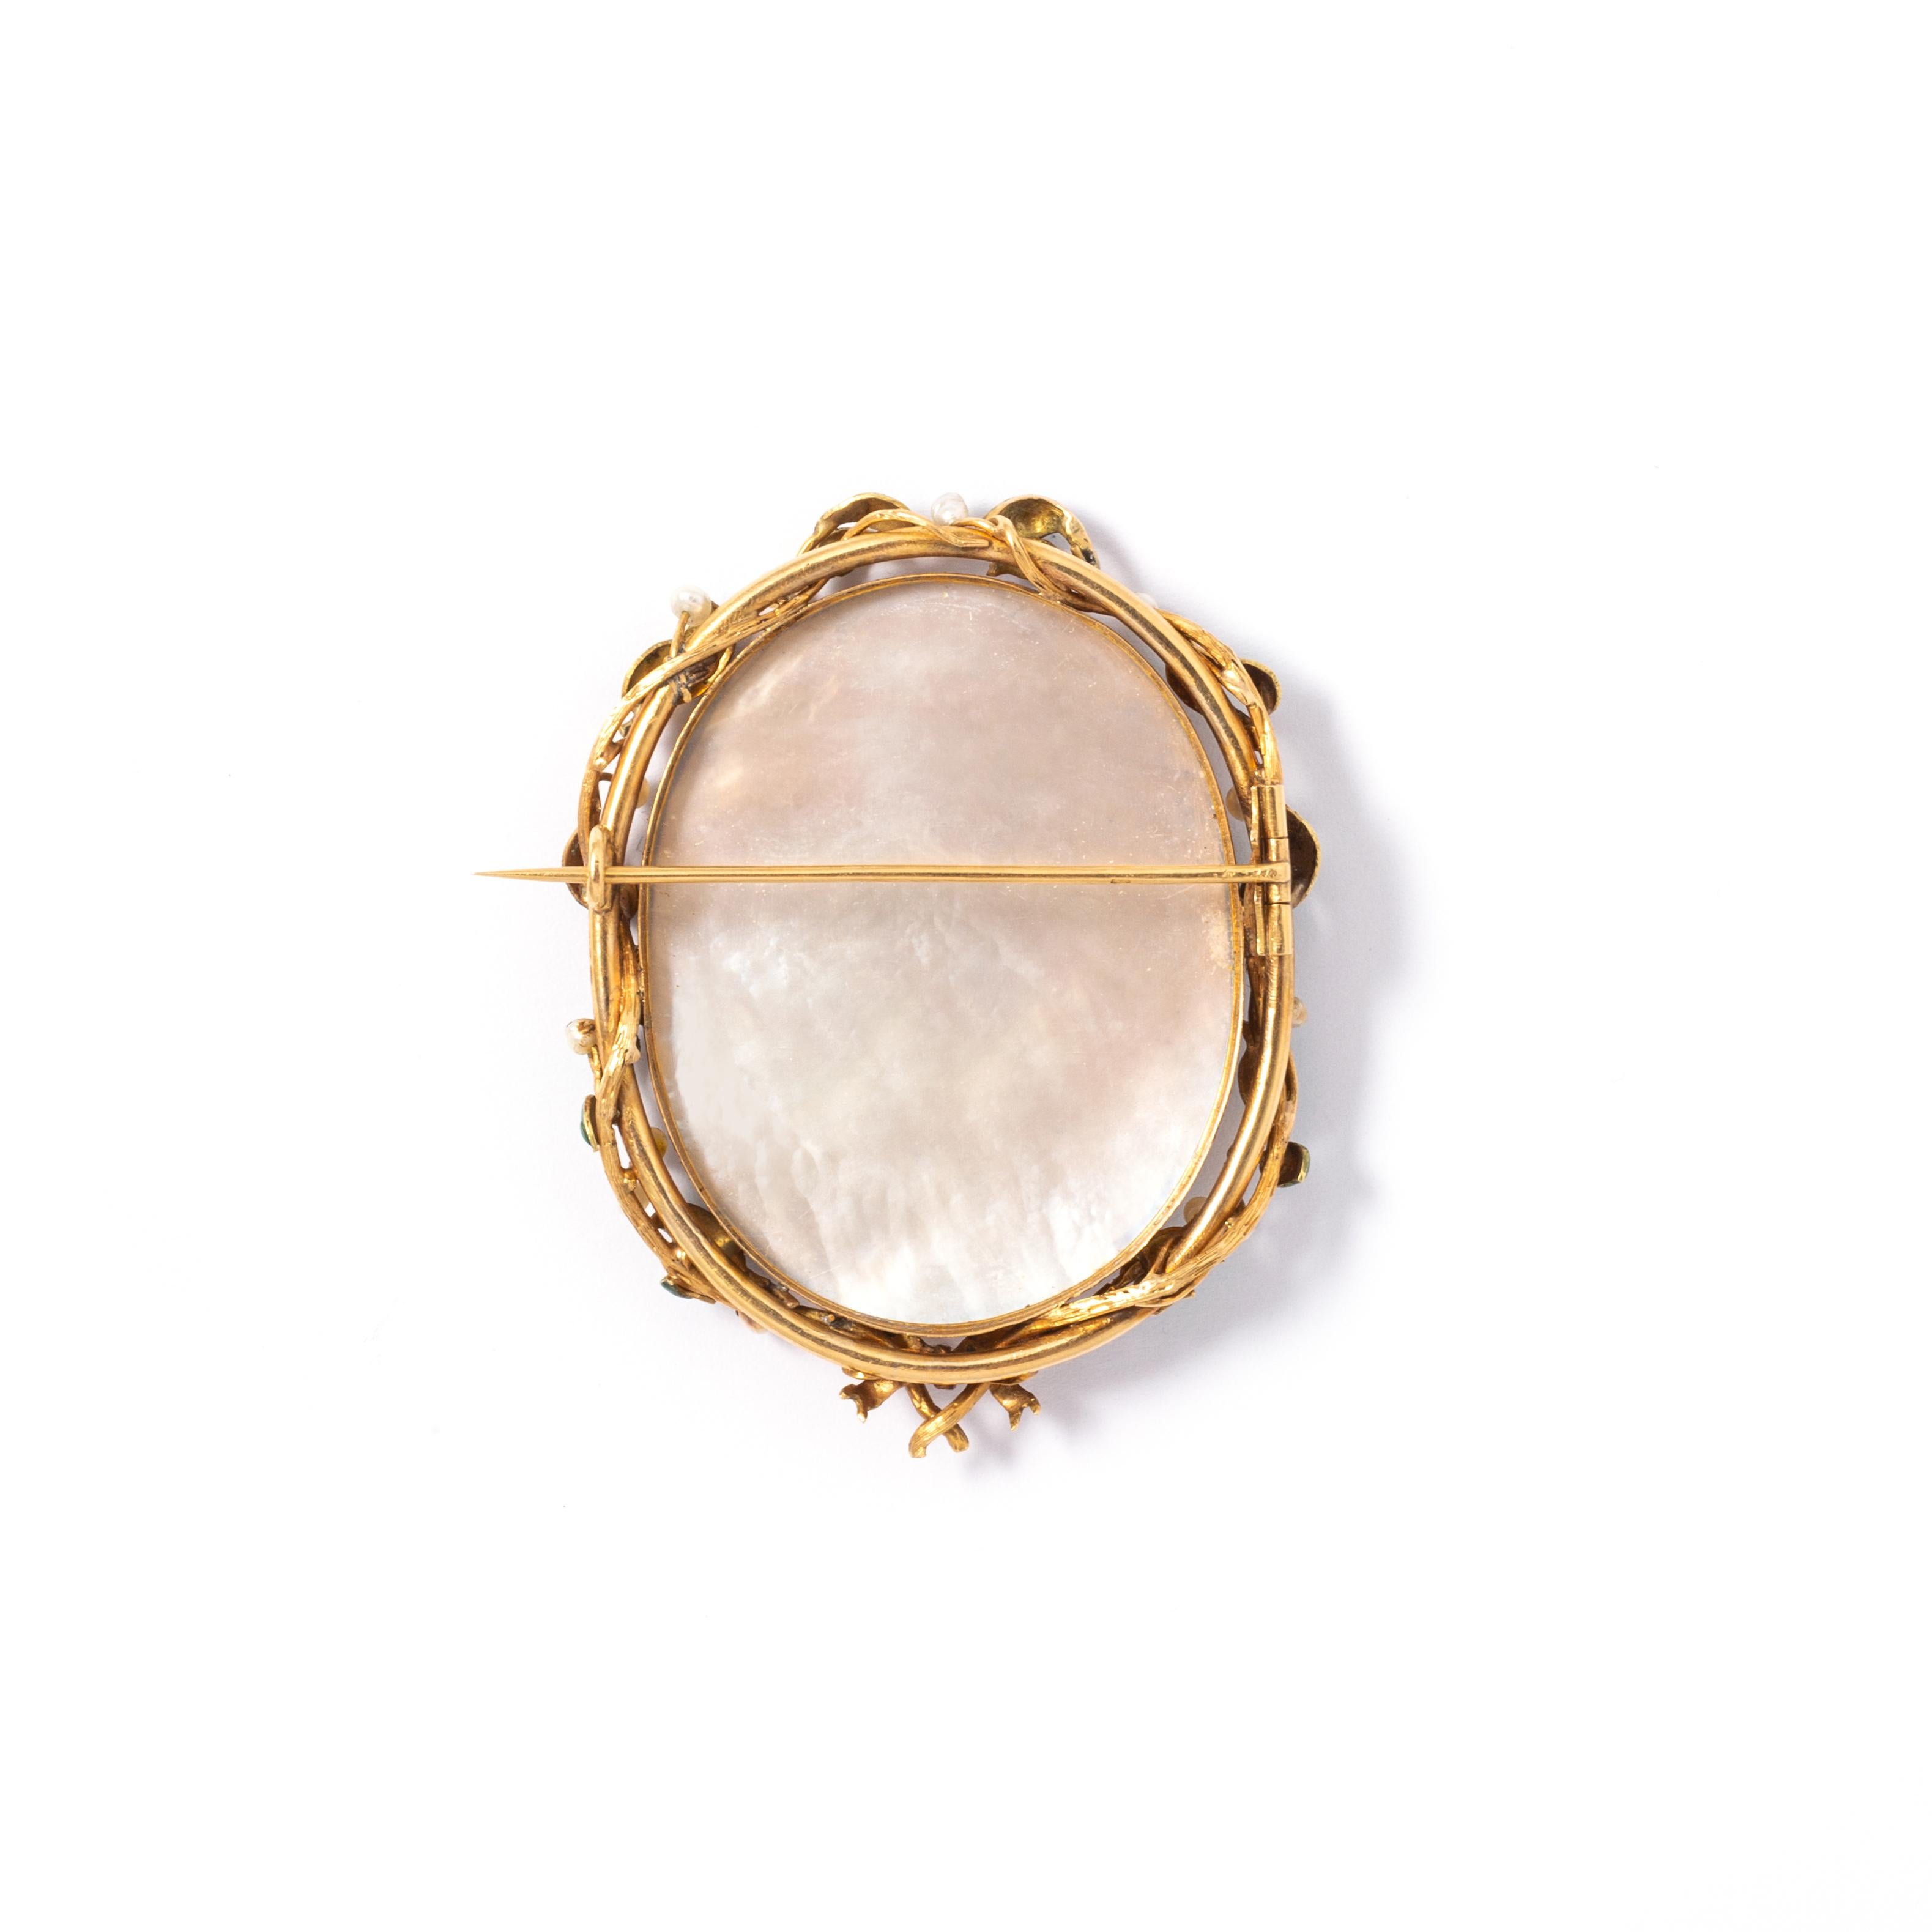 Enameled yellow gold Brooch.
Size: 6.00 x 4.50 cm.
Gross weight: 18.00 grams.